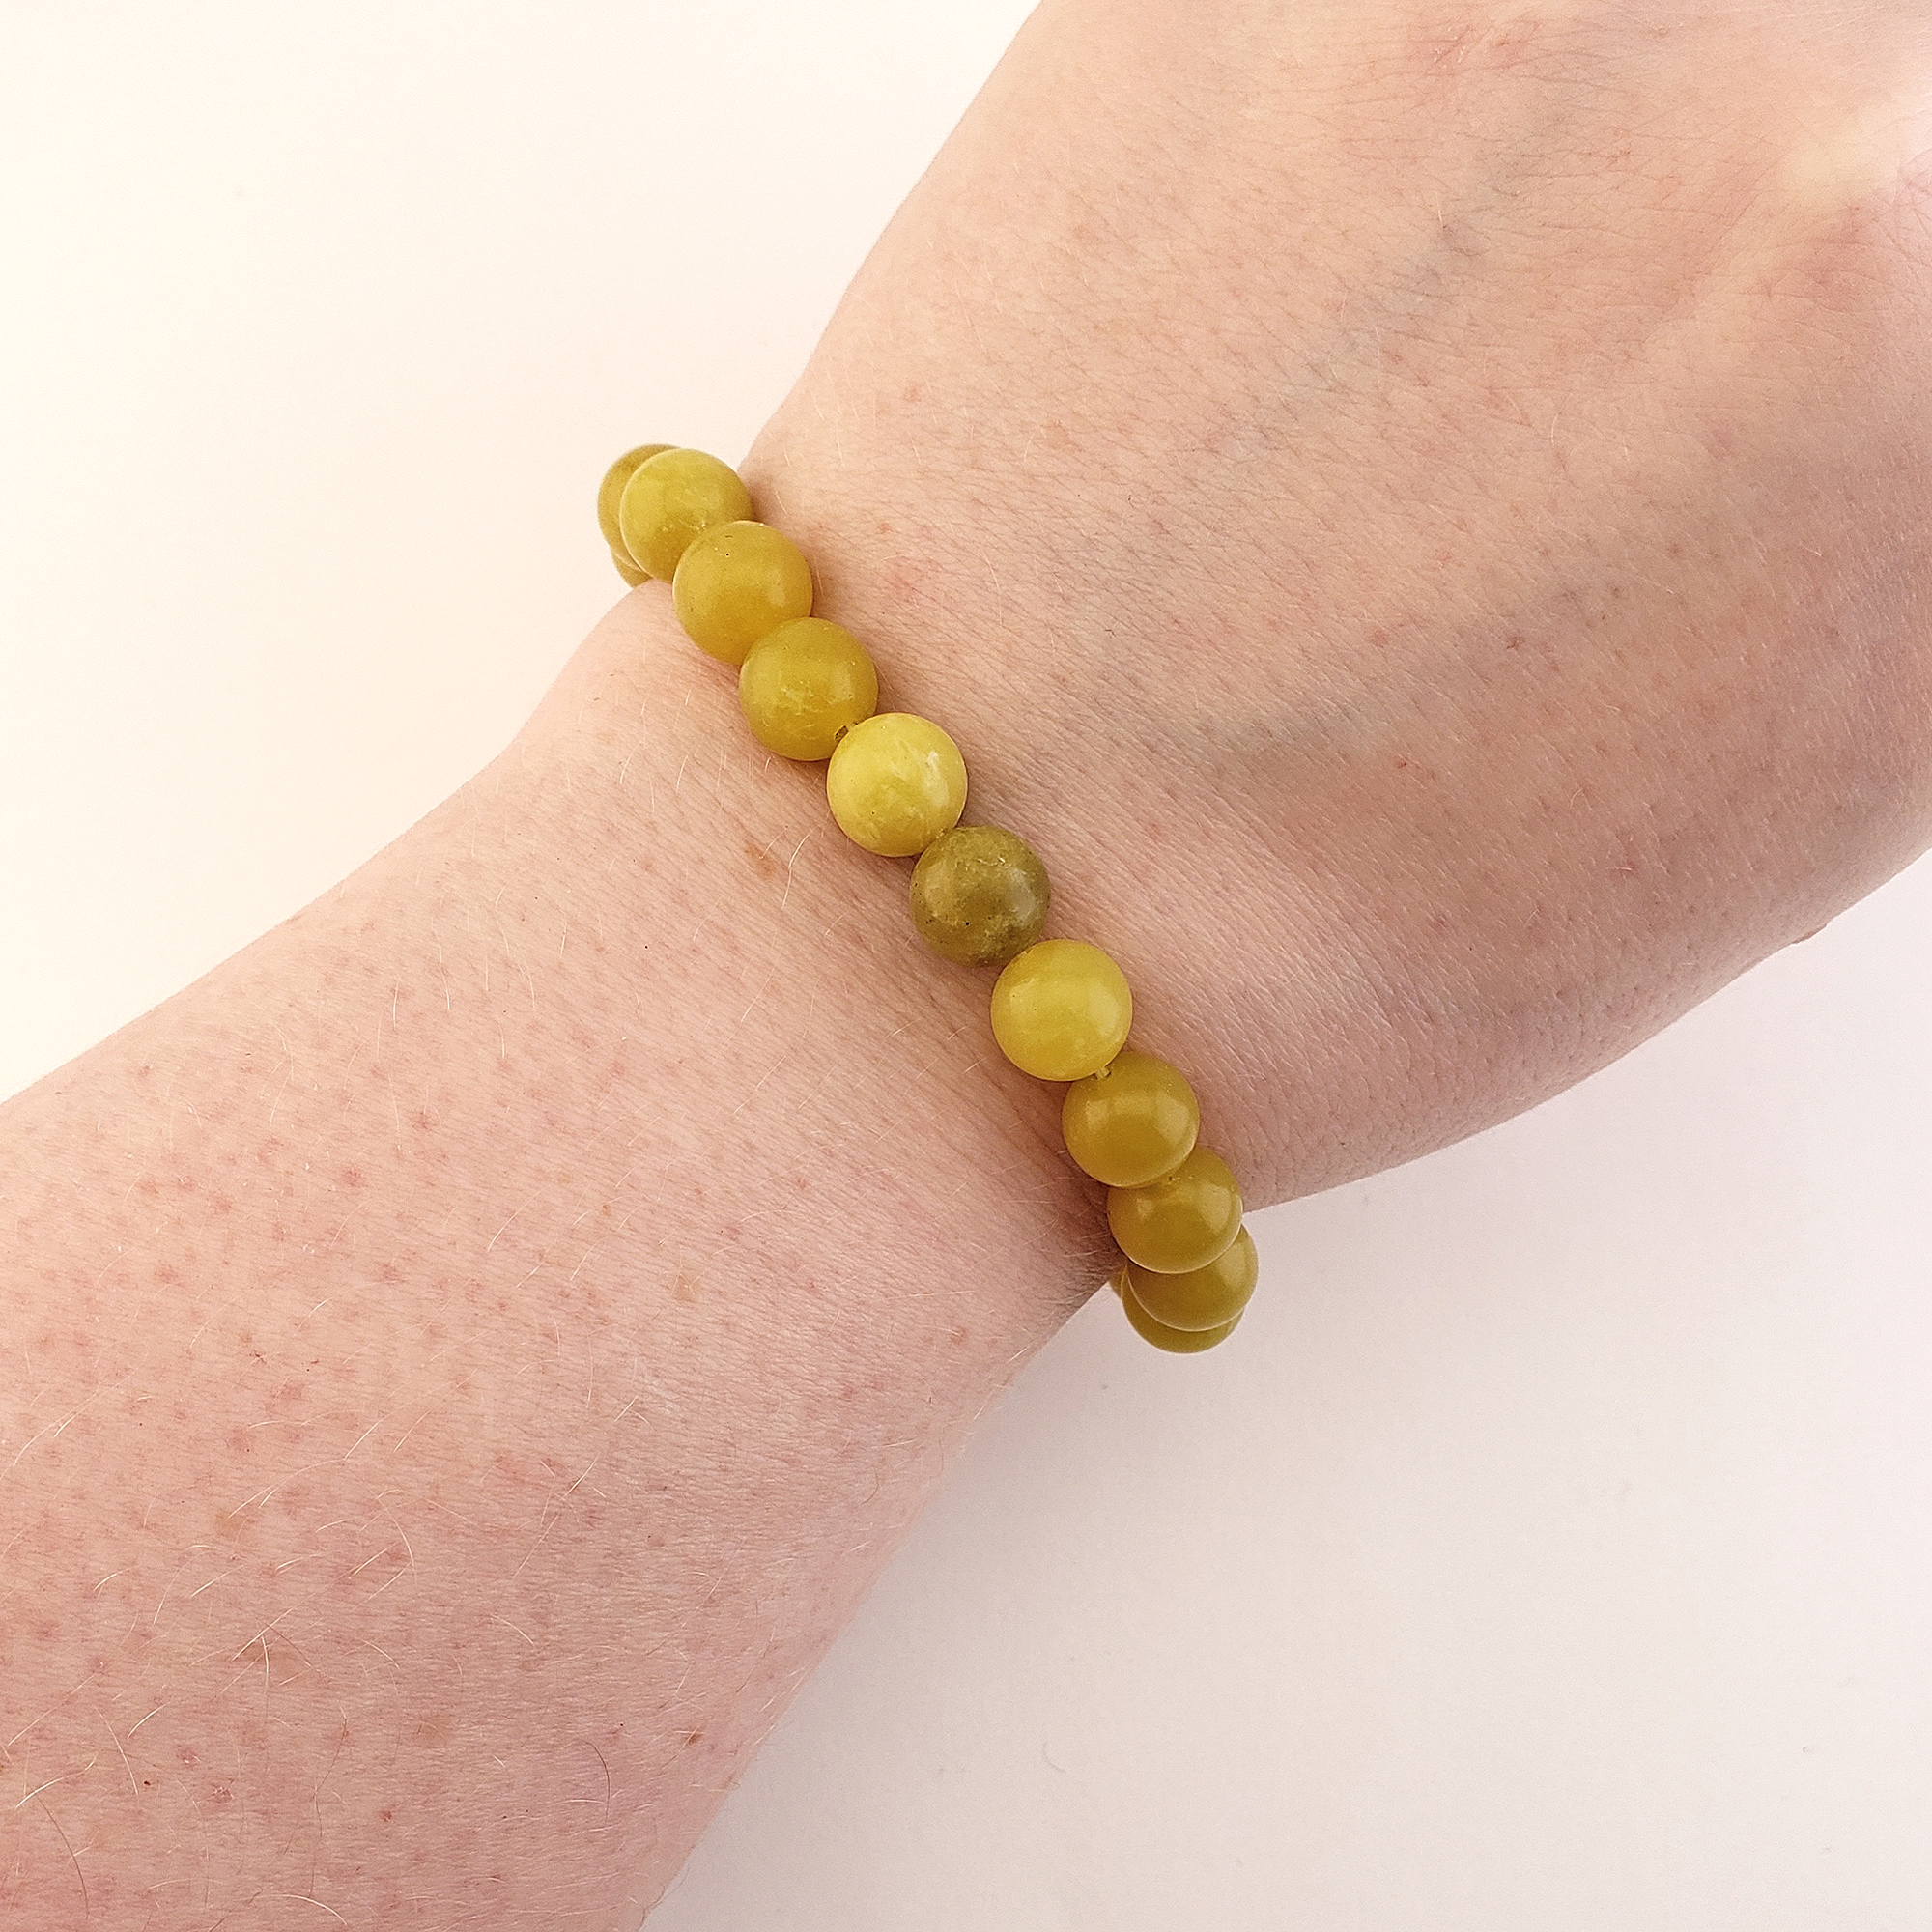 Yellow Serpentine Natural Crystal 7-8mm Bead Bracelet - Serpentine Crystal Bracelet on Wrist Above White Background